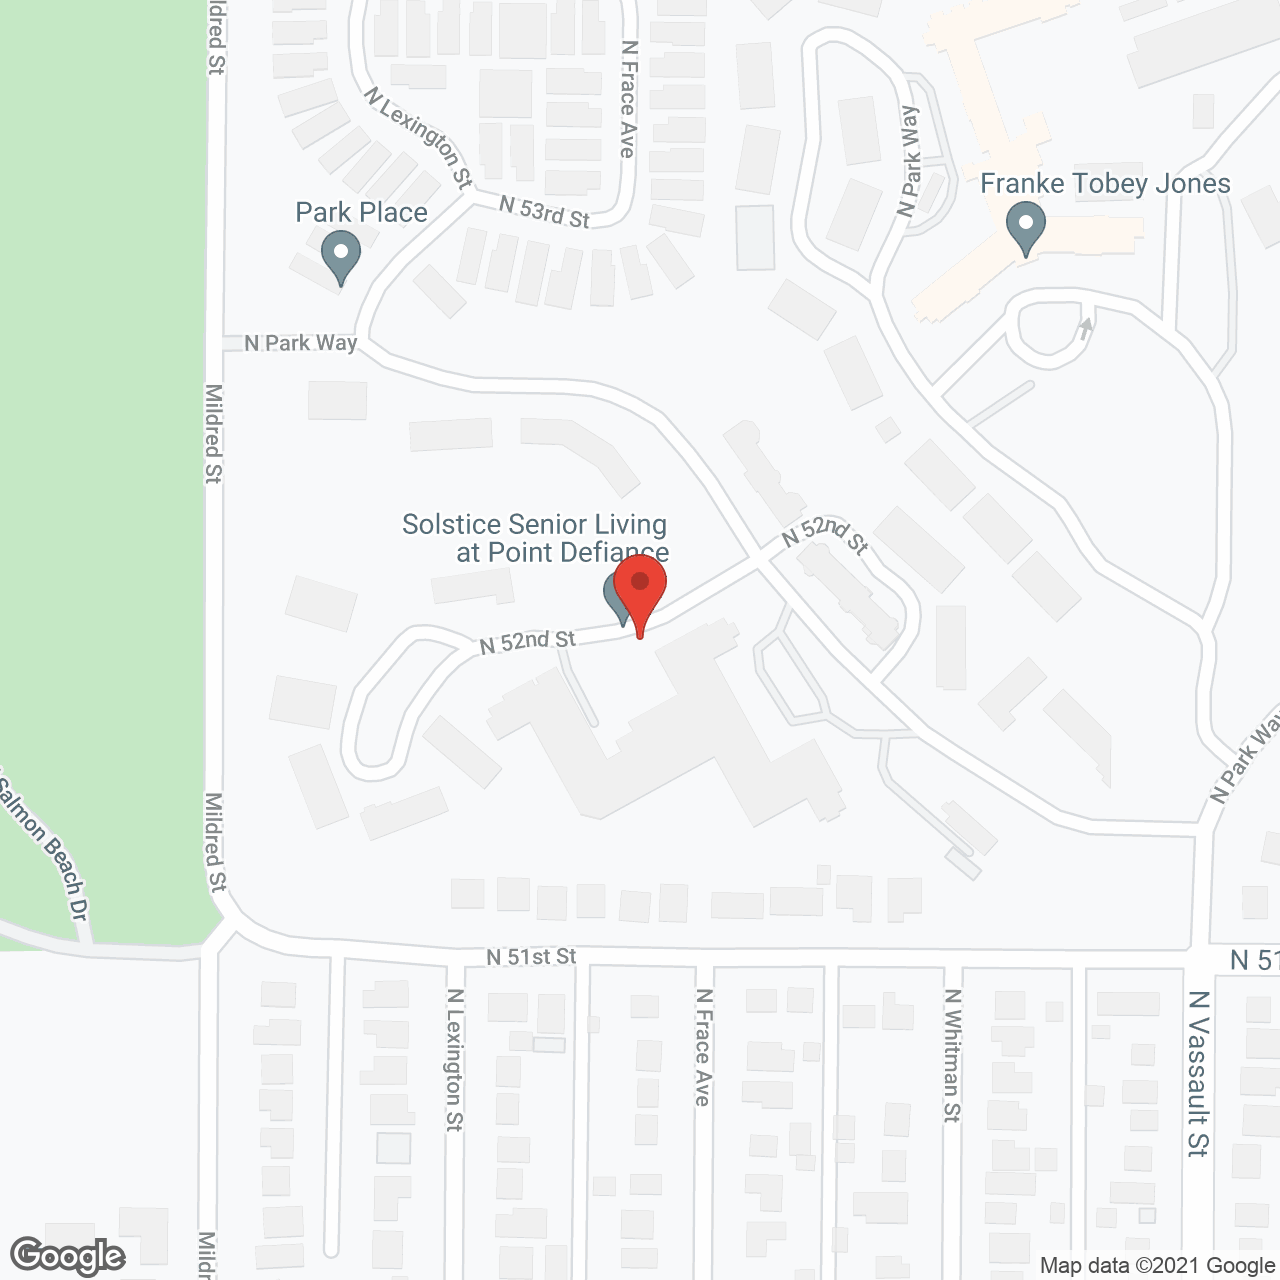 Solstice Senior Living at Point Defiance in google map